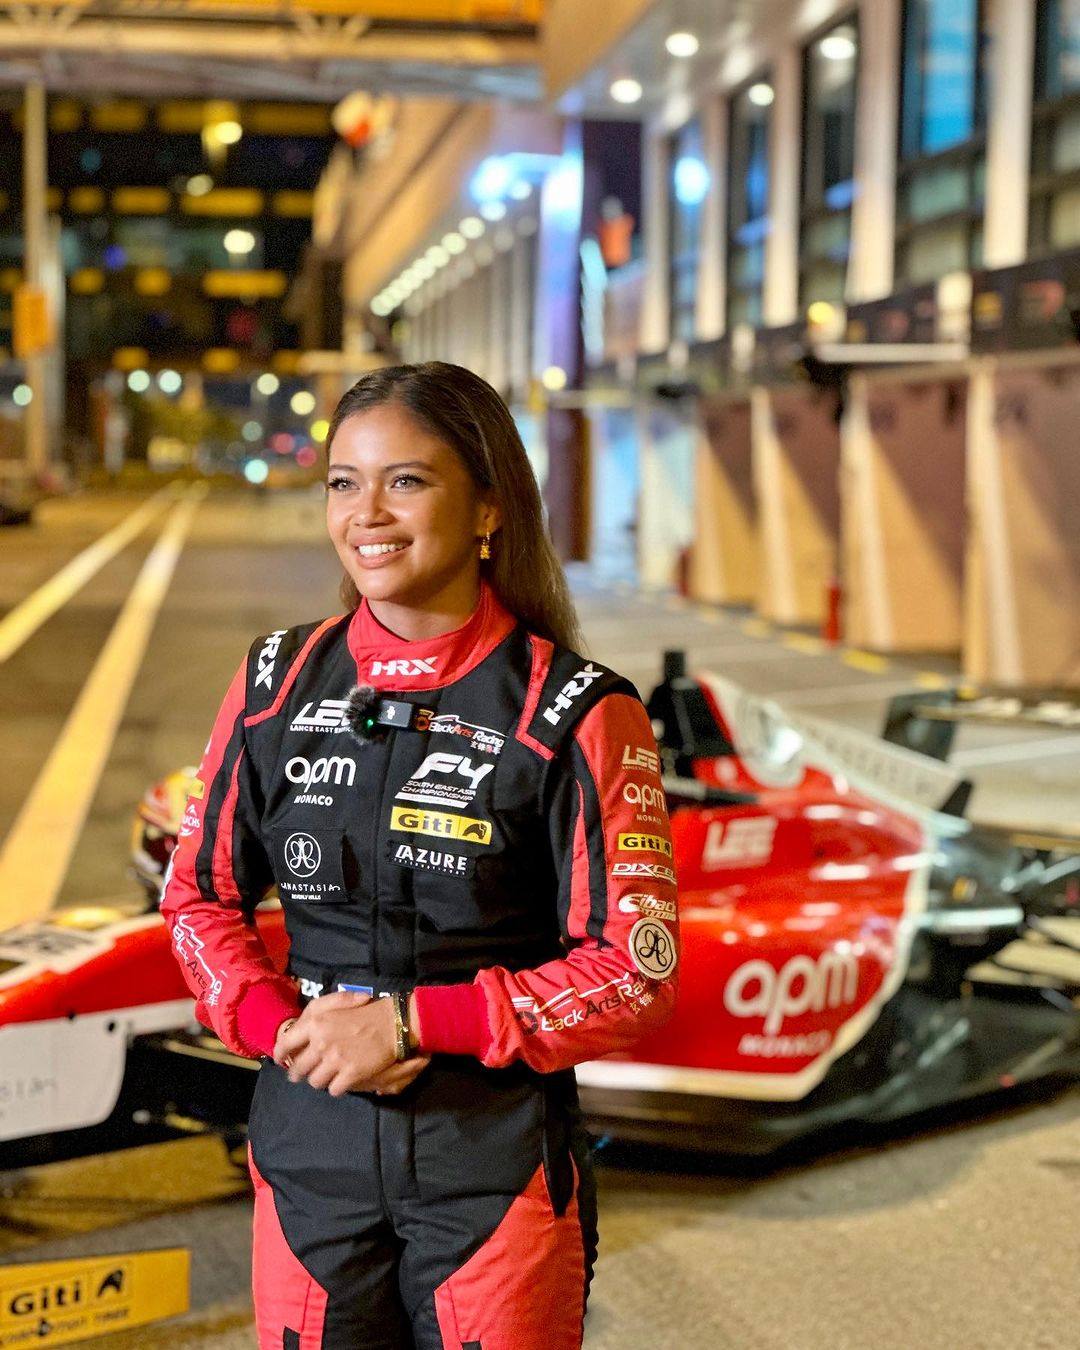 Meet teen Filipino-American Formula One star, Bianca Bustamante: the  winning McLaren team member began go-karting at age 3, and wows fans with  her fashion, fitness and travel posts on social media